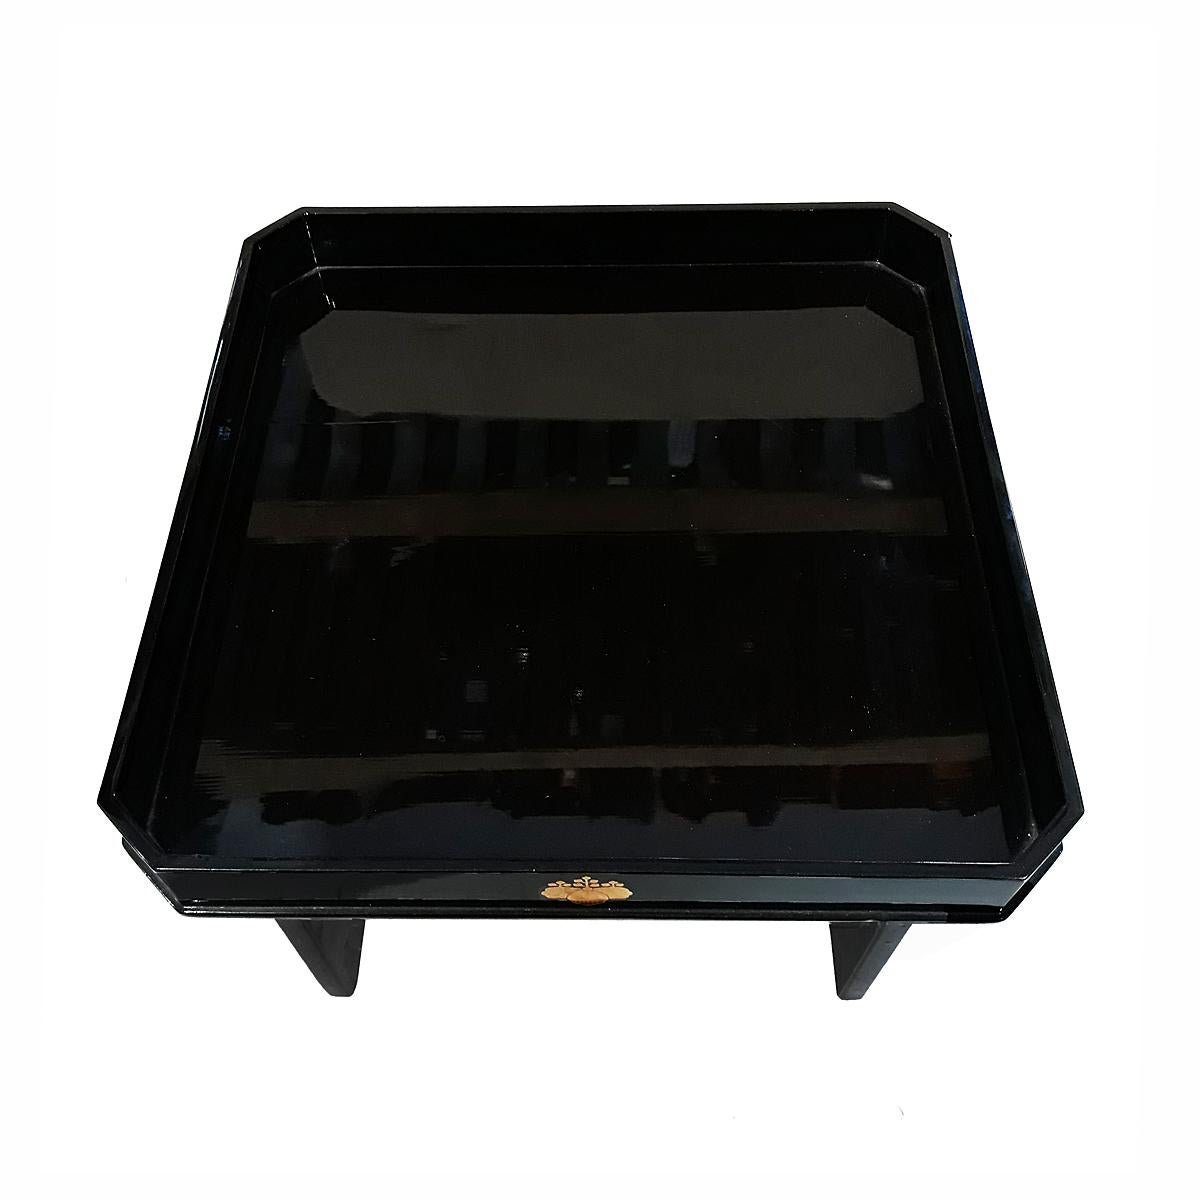 Mid-20th Century Japanese Lacquered Tray Table, Early Showa Period